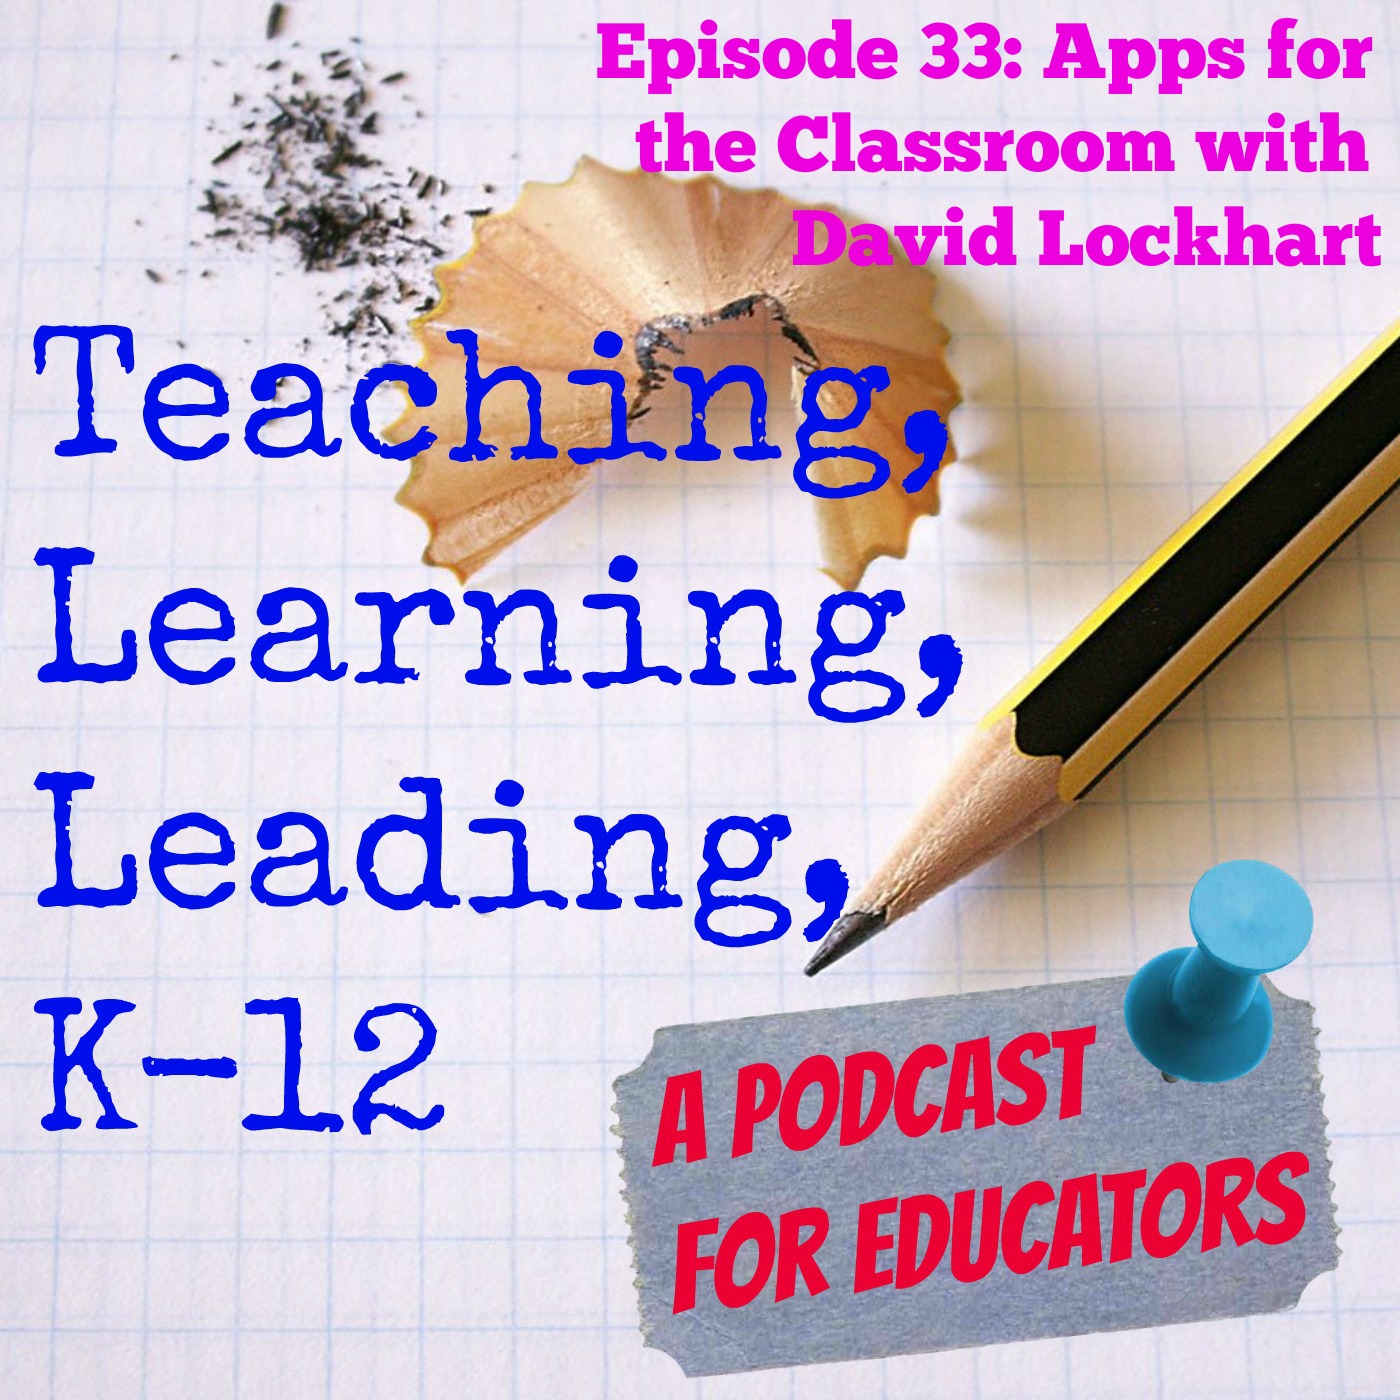 Episode 33: Six Apps for the Classroom with David Lockhart